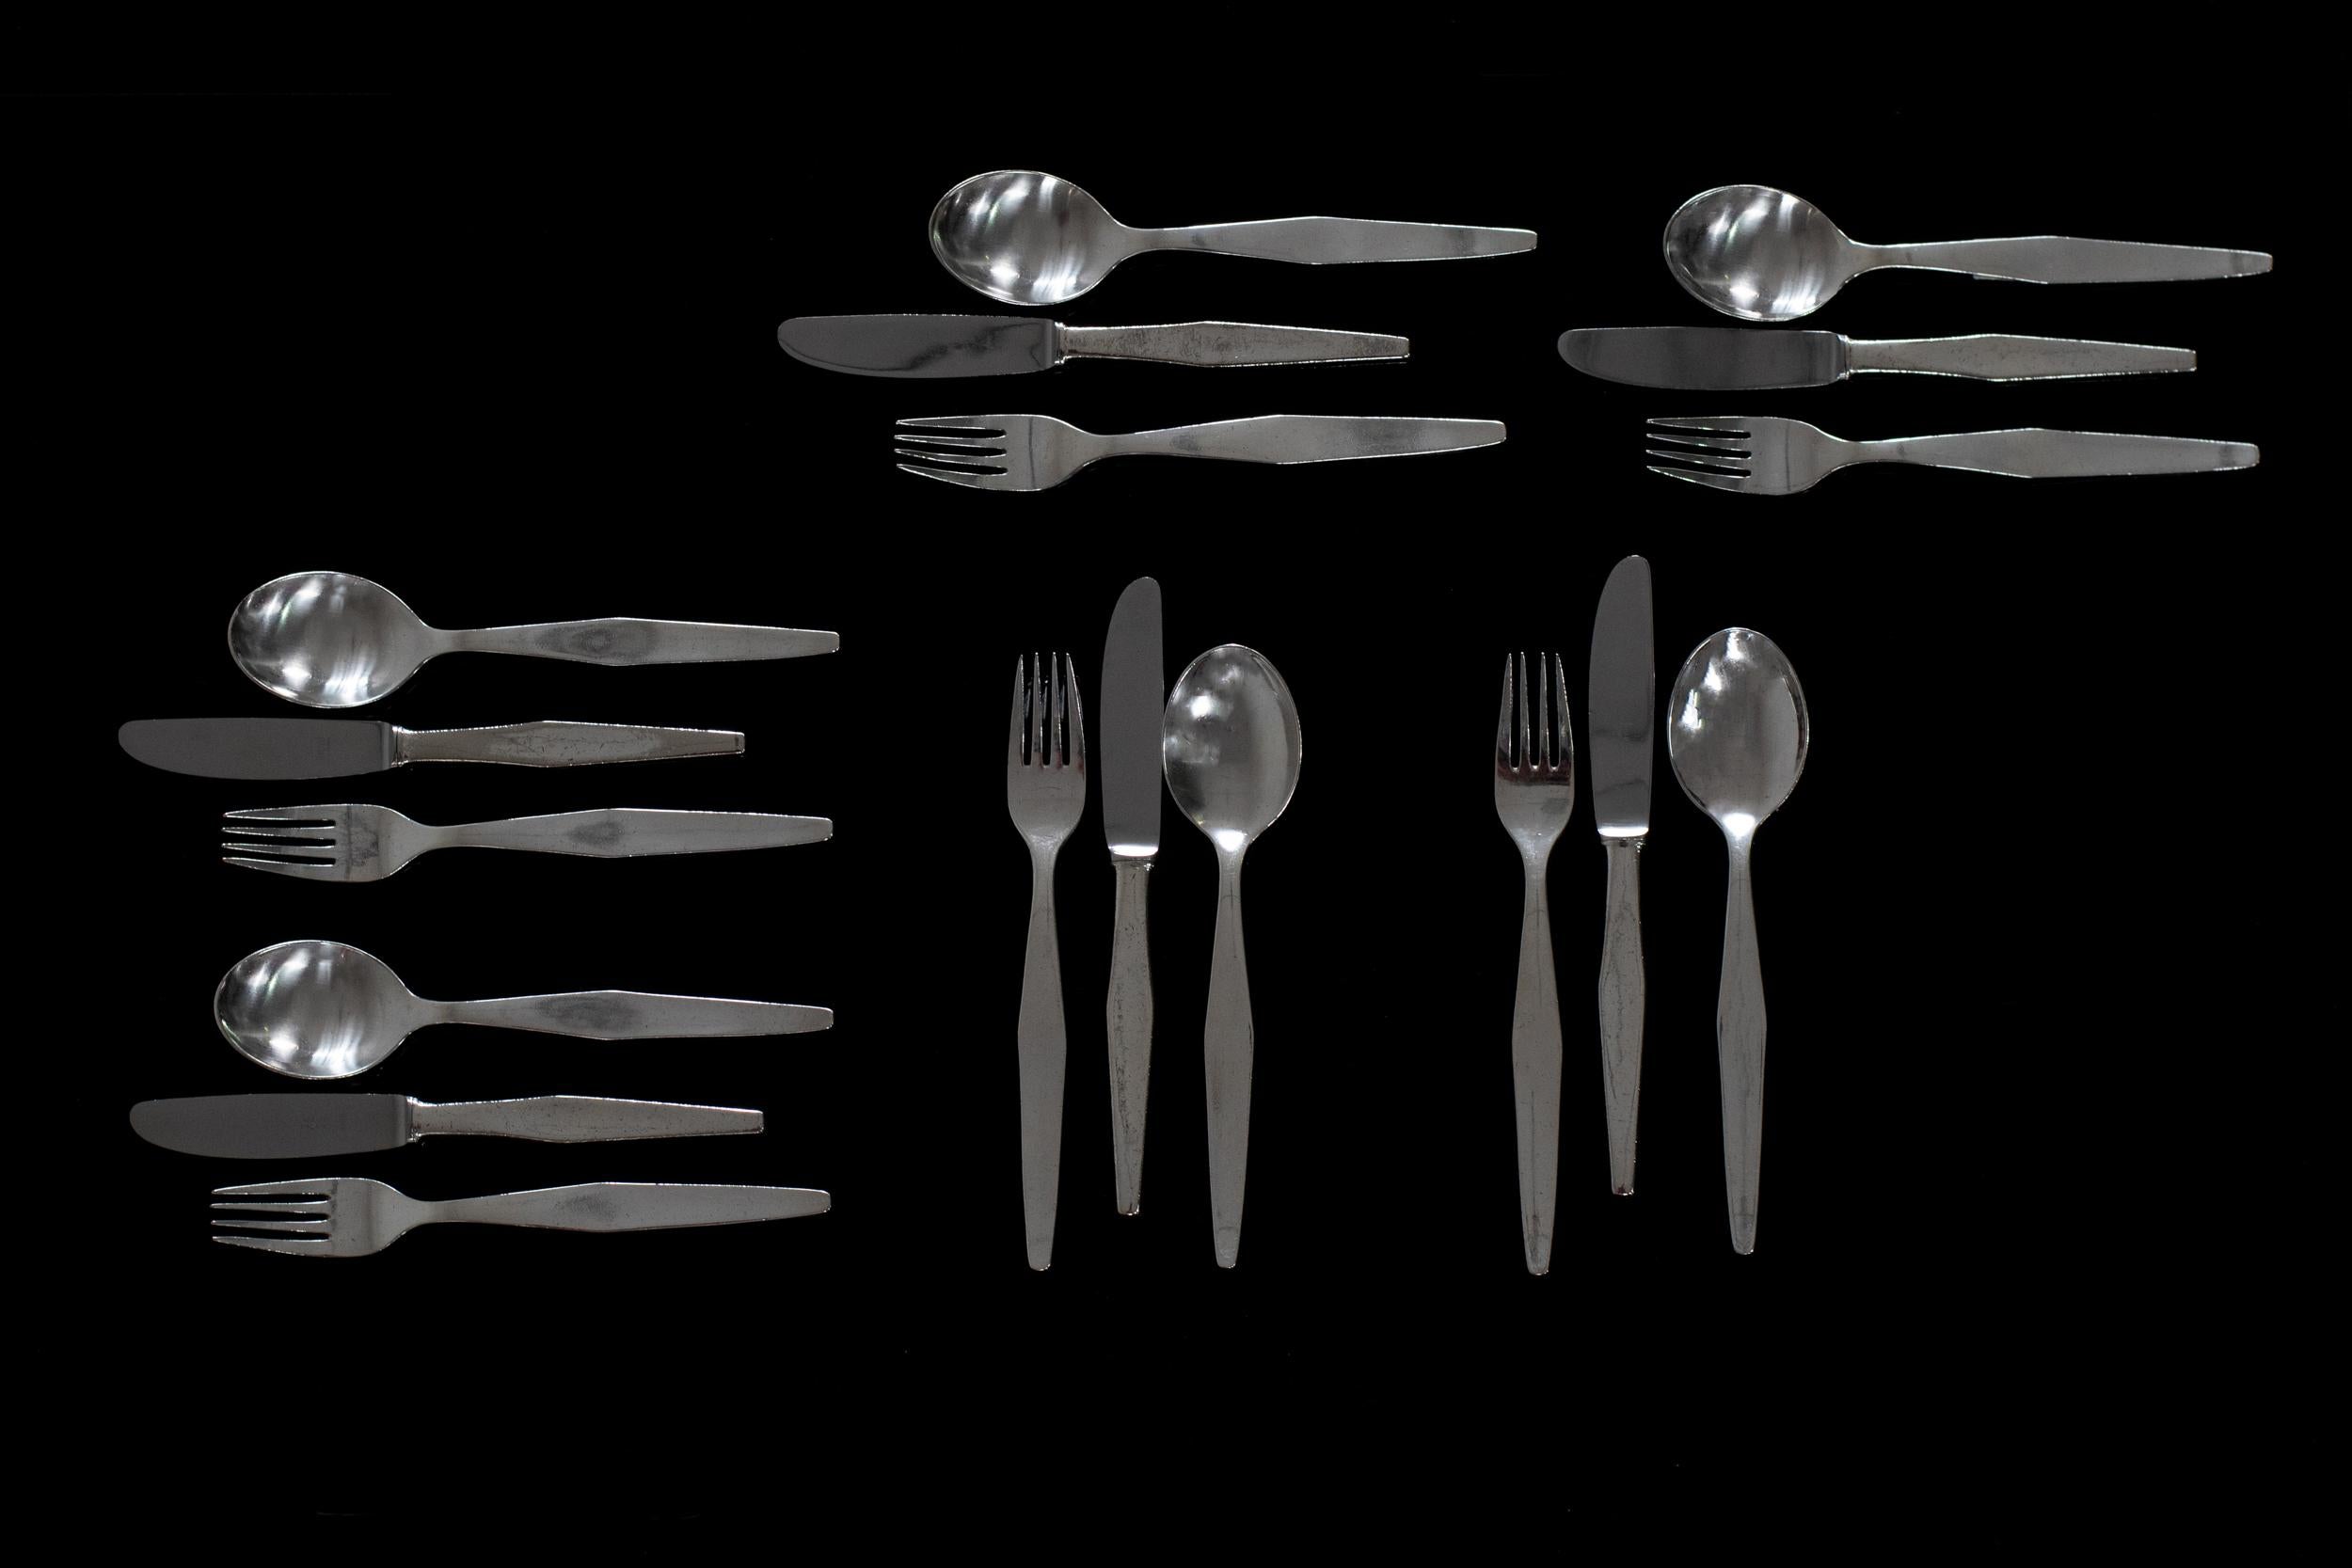 Mid-Century Modern Gio Ponti Cutlery Set for Six in Nickel Silver by Krupp Italy 1950s For Sale